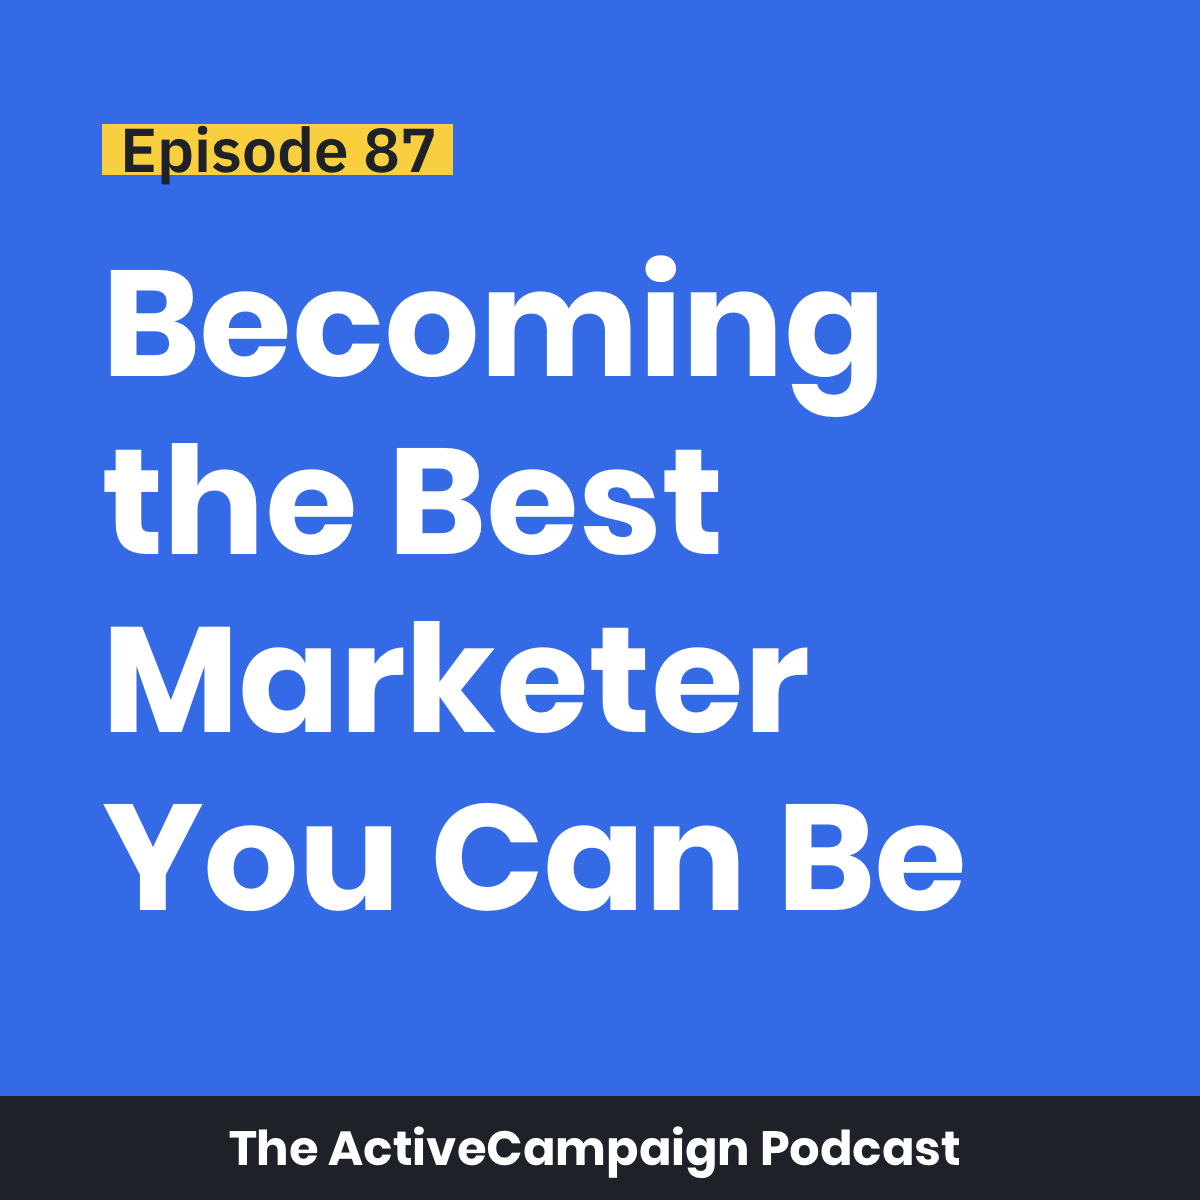 Pm Podcast Episode Spreadsheet for Episode 87: Becoming The Best Marketer You Can Be ...1200 x 1200